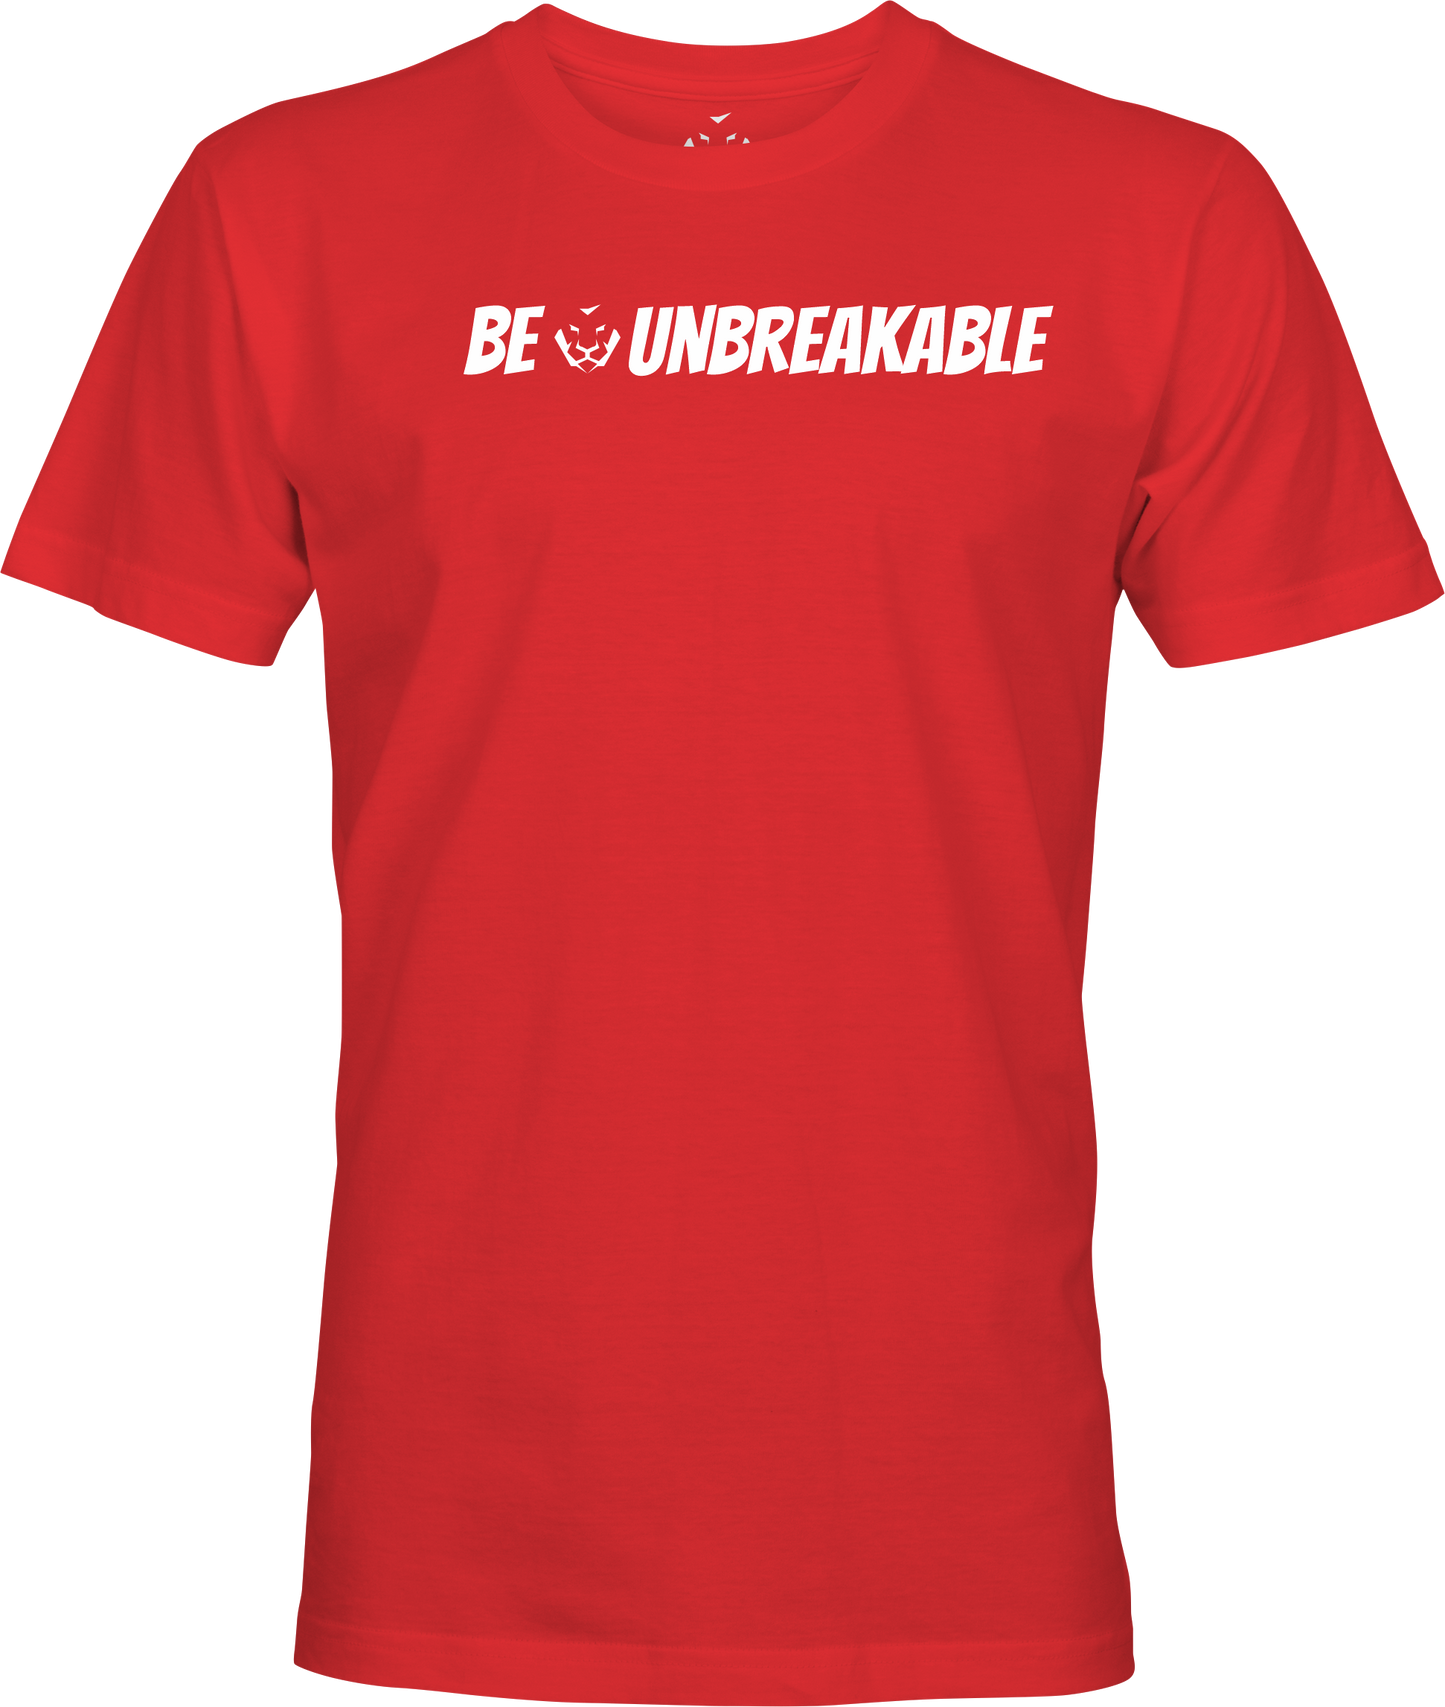 Be Unbreakable - S.O.A.L Apparel